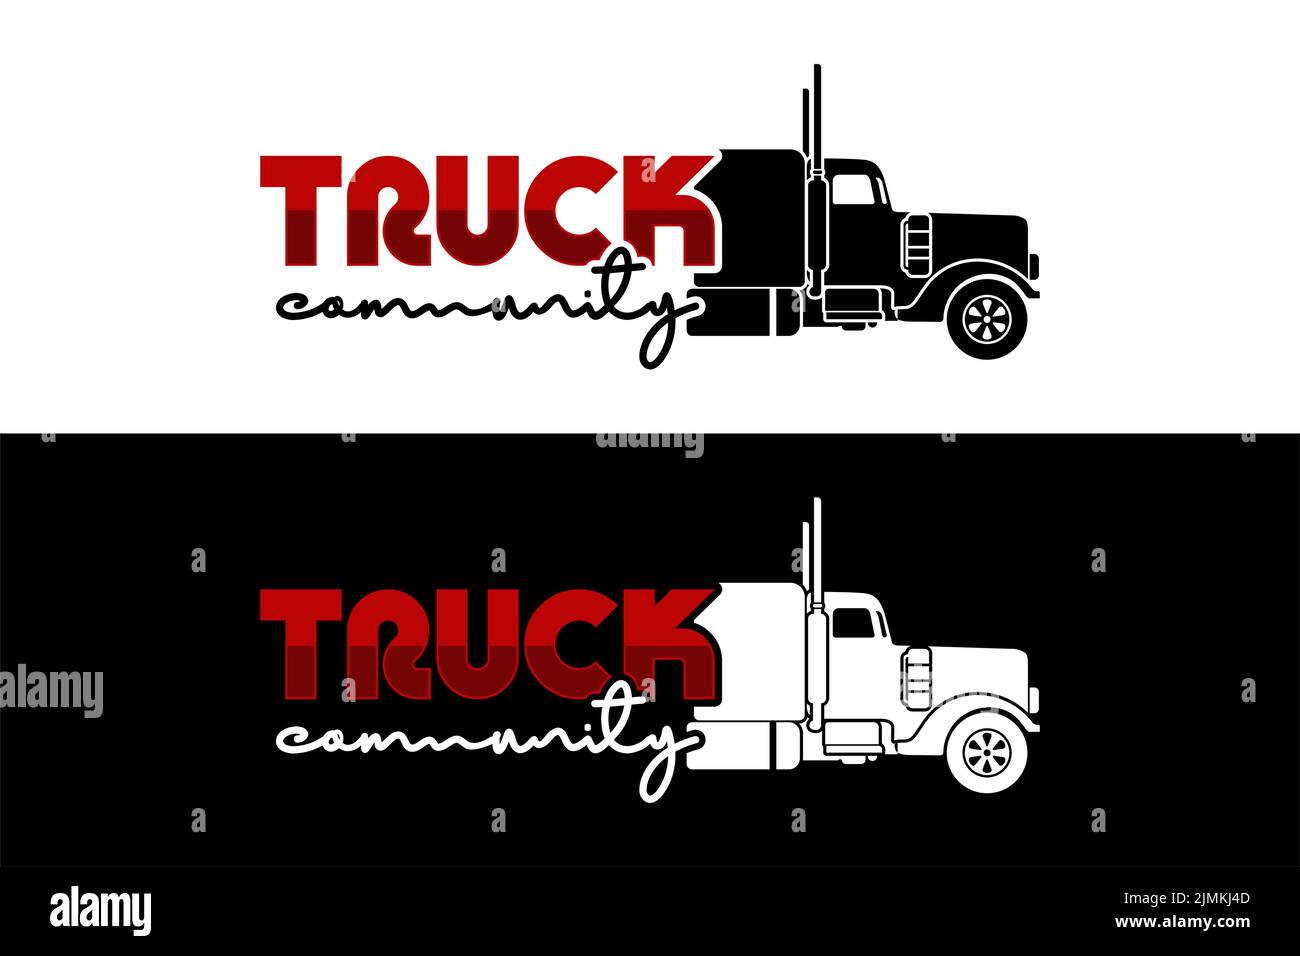 Truck Typography With Truck Head Lory Logo Design Inspiration Stock Vector